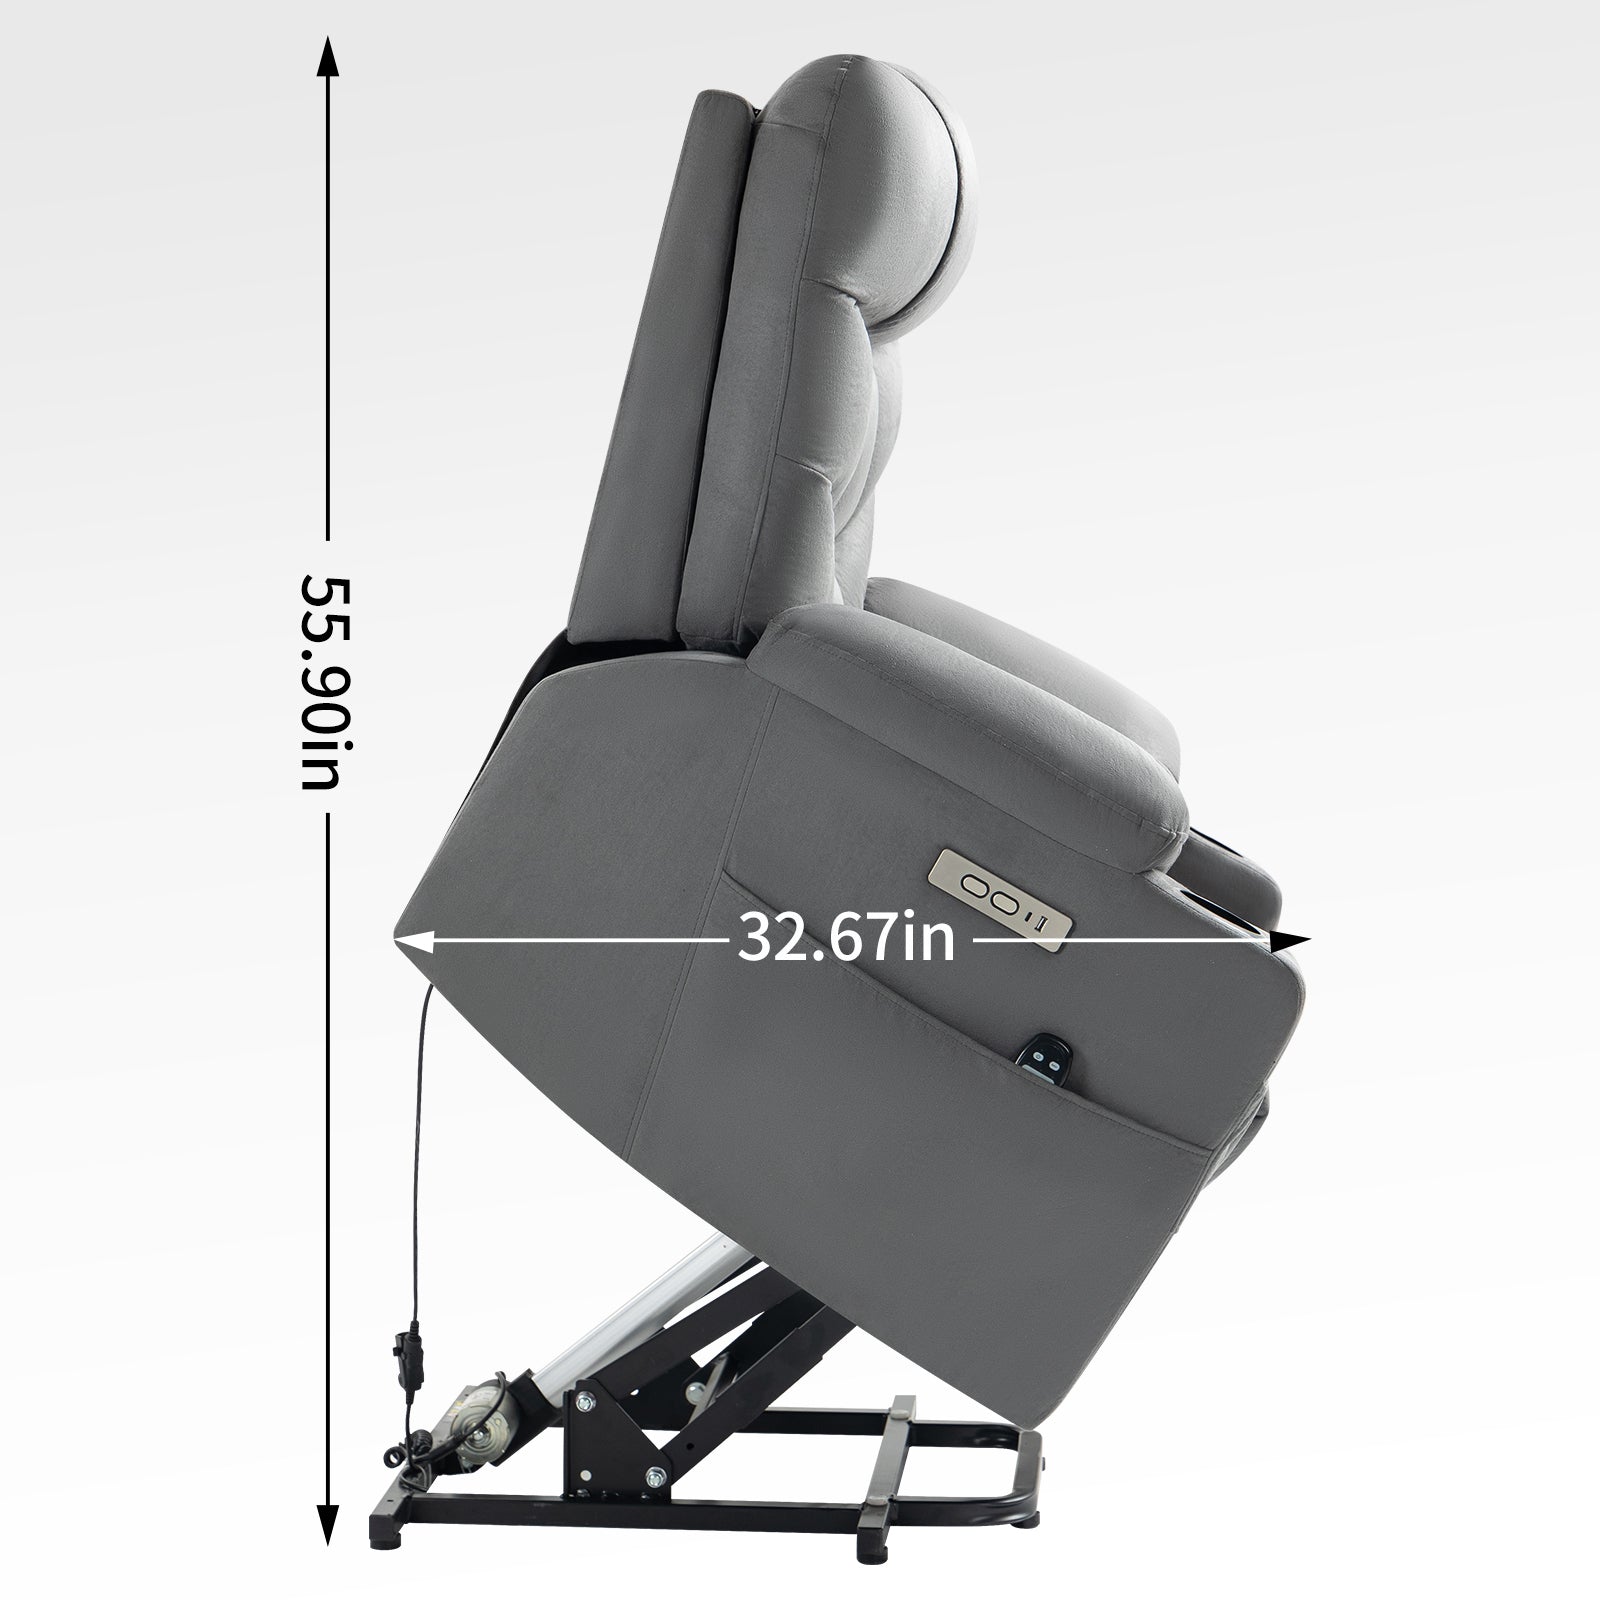 Grey Power Lift Recliner Chair with Vibration Massage and Lumbar Heat, lifted with dimensions